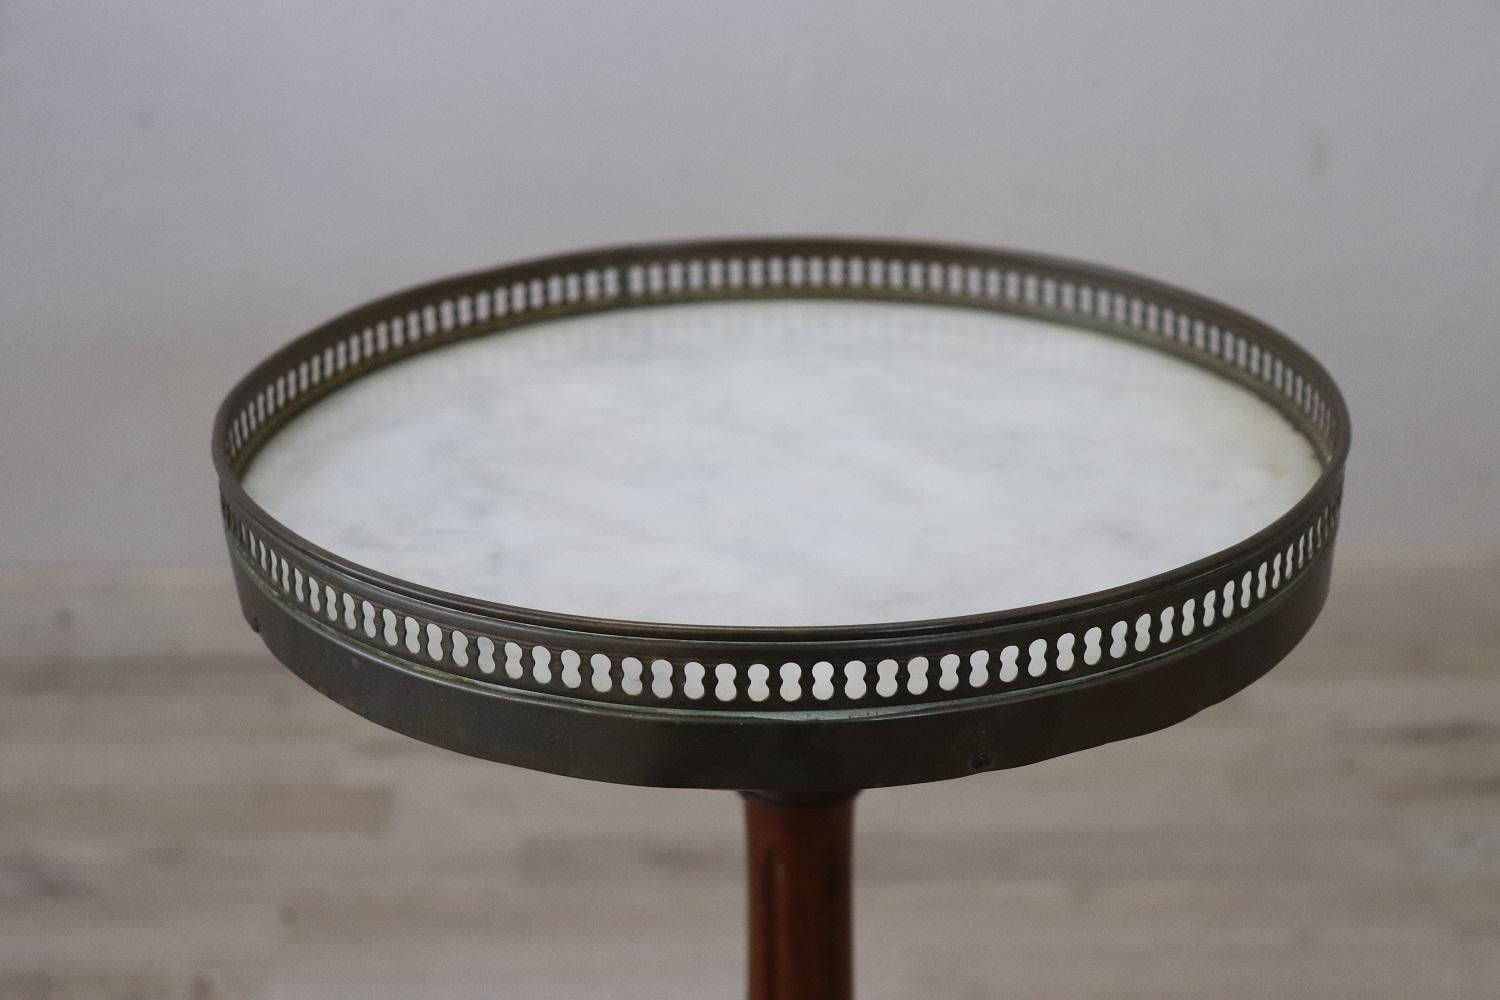 Late 19th Century 19th Century Italian Walnut Round Side Table, Pedestal Table or Smoking Table